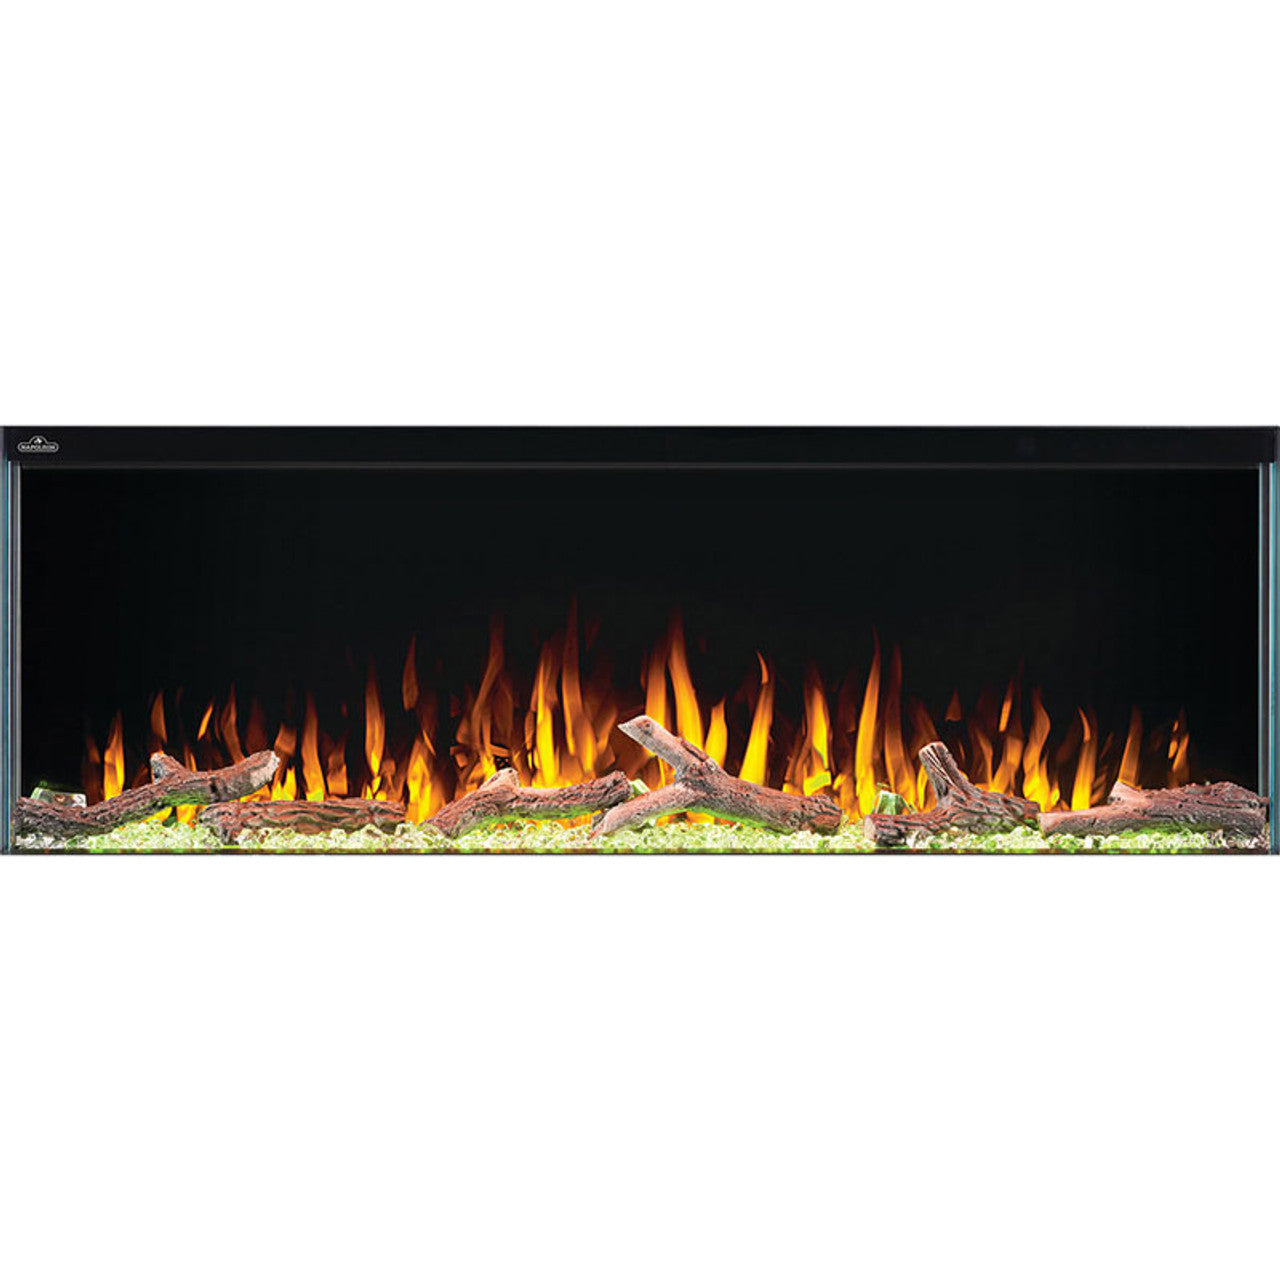 Trivista 50 3-Sided Built-In Electric Linear Fireplace - NEFB50H-3SV - Chimney Cricket